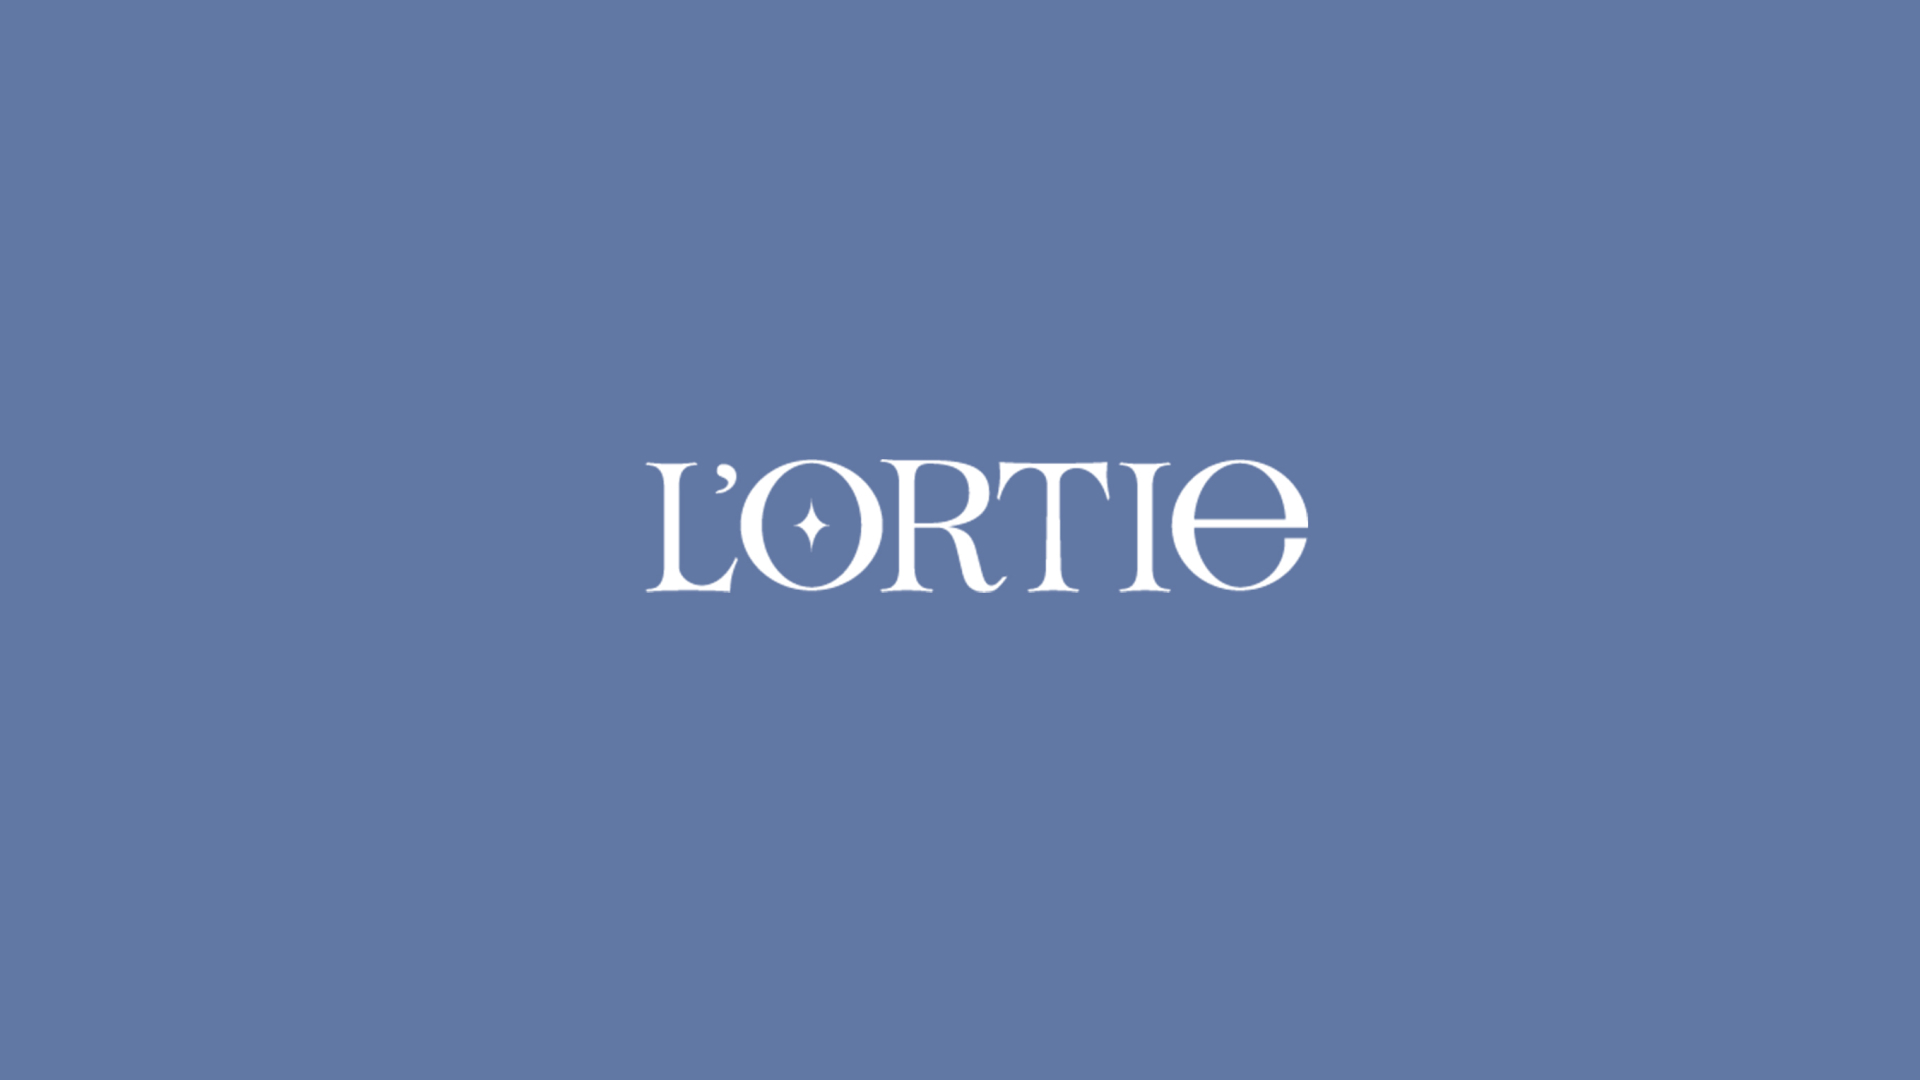 Student Concept for L’Ortie Fashion Brand Identity by Sophie Tsoy